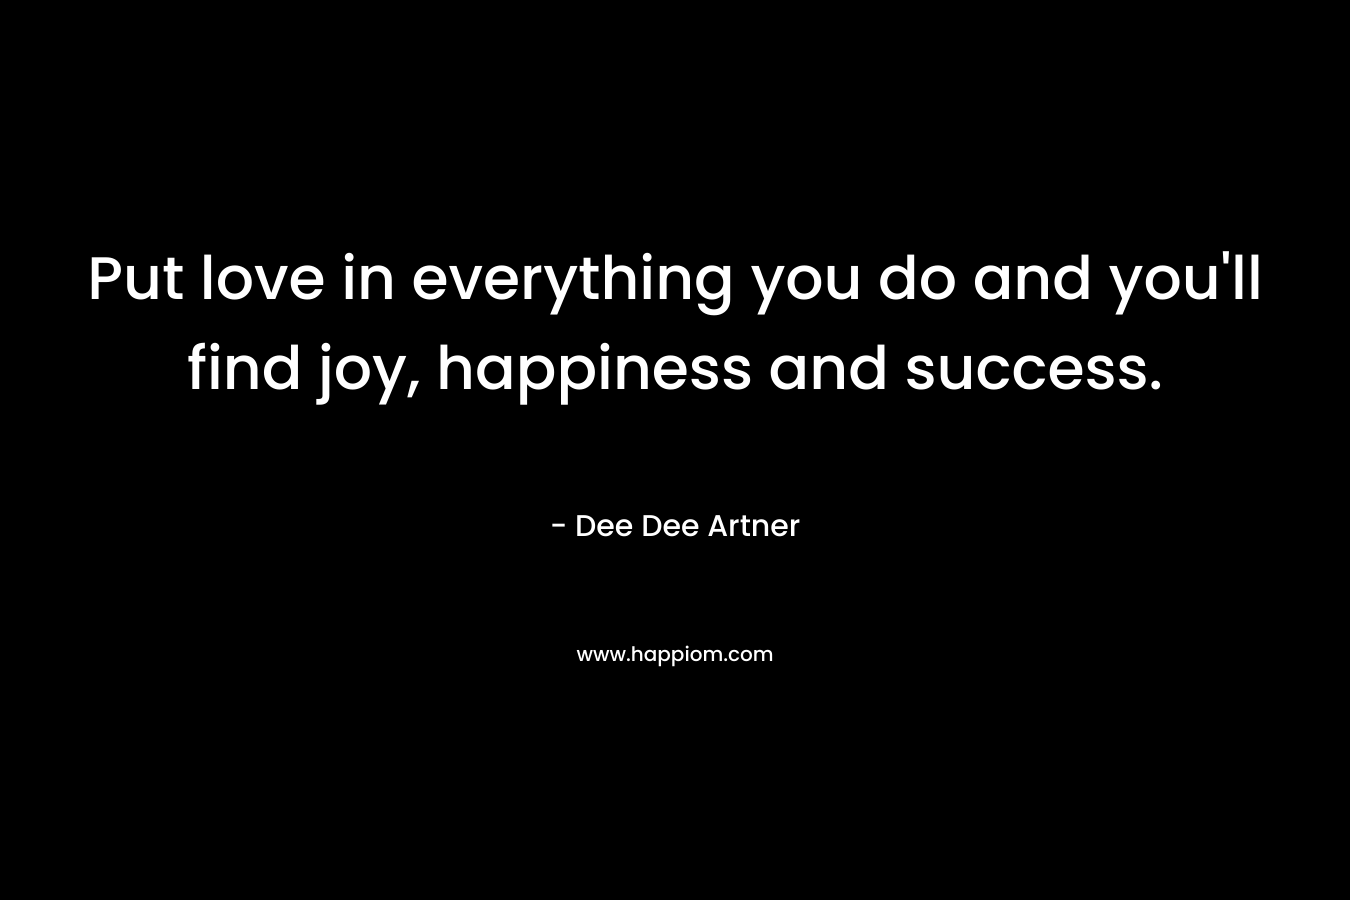 Put love in everything you do and you’ll find joy, happiness and success. – Dee Dee Artner